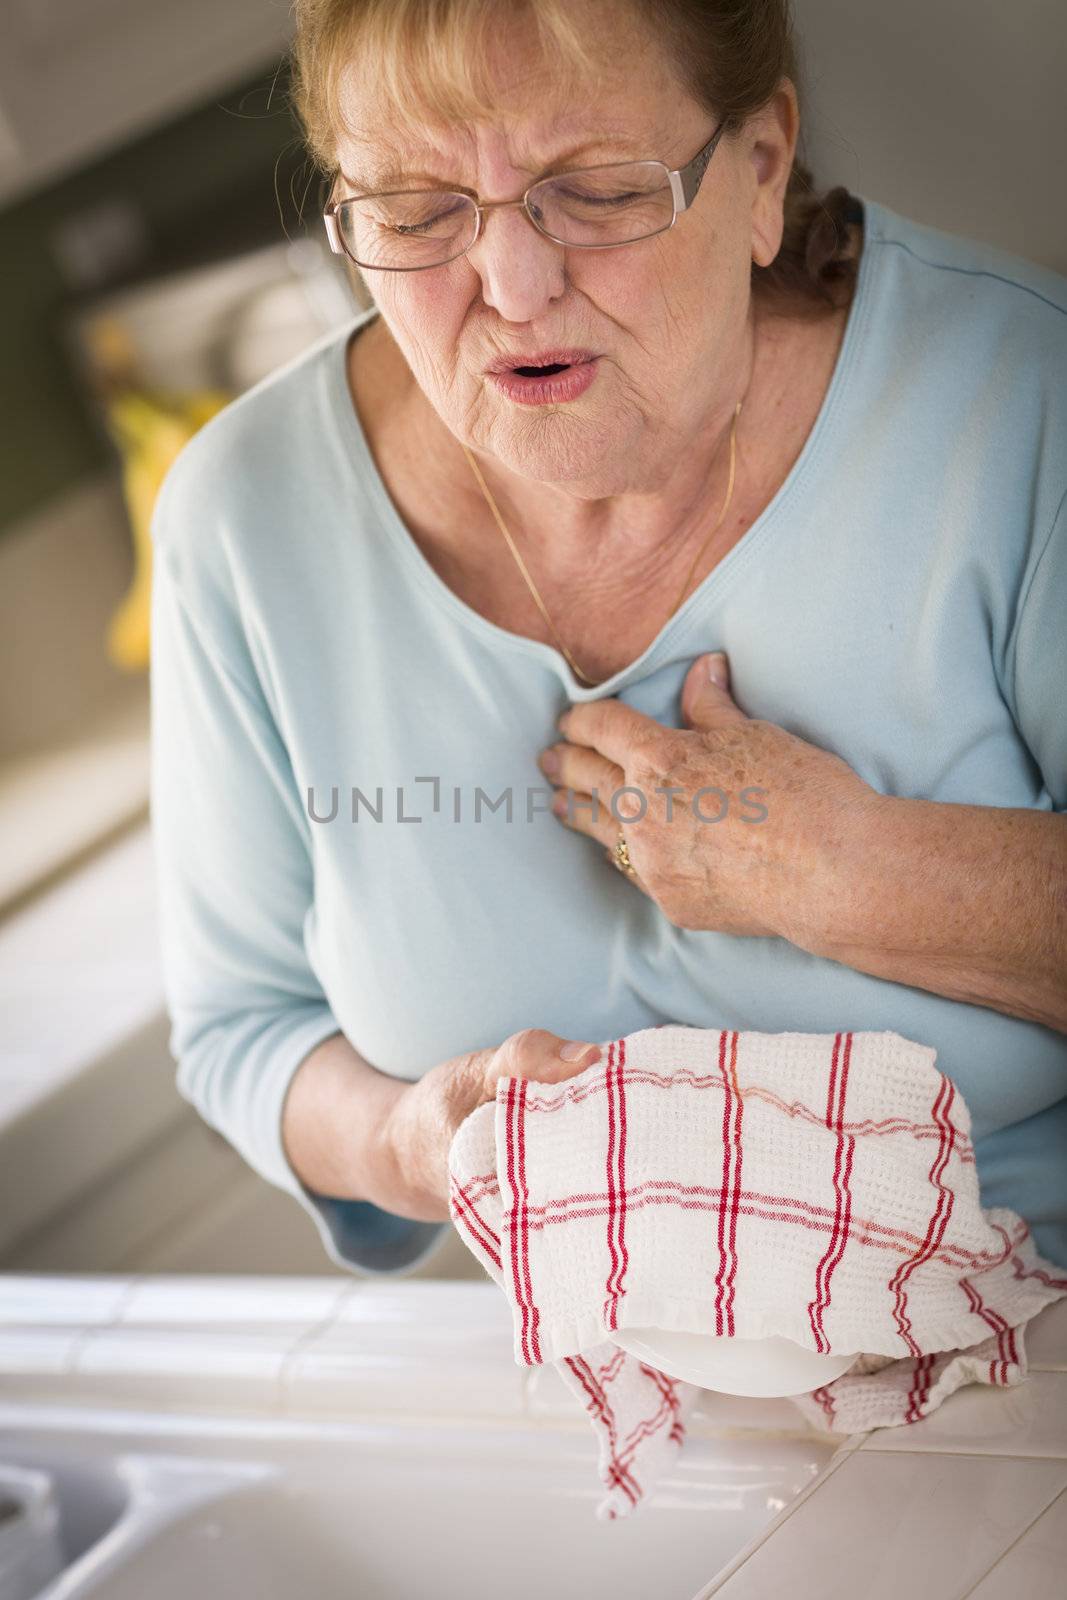 Senior Adult Woman At Sink With Chest Pains by Feverpitched